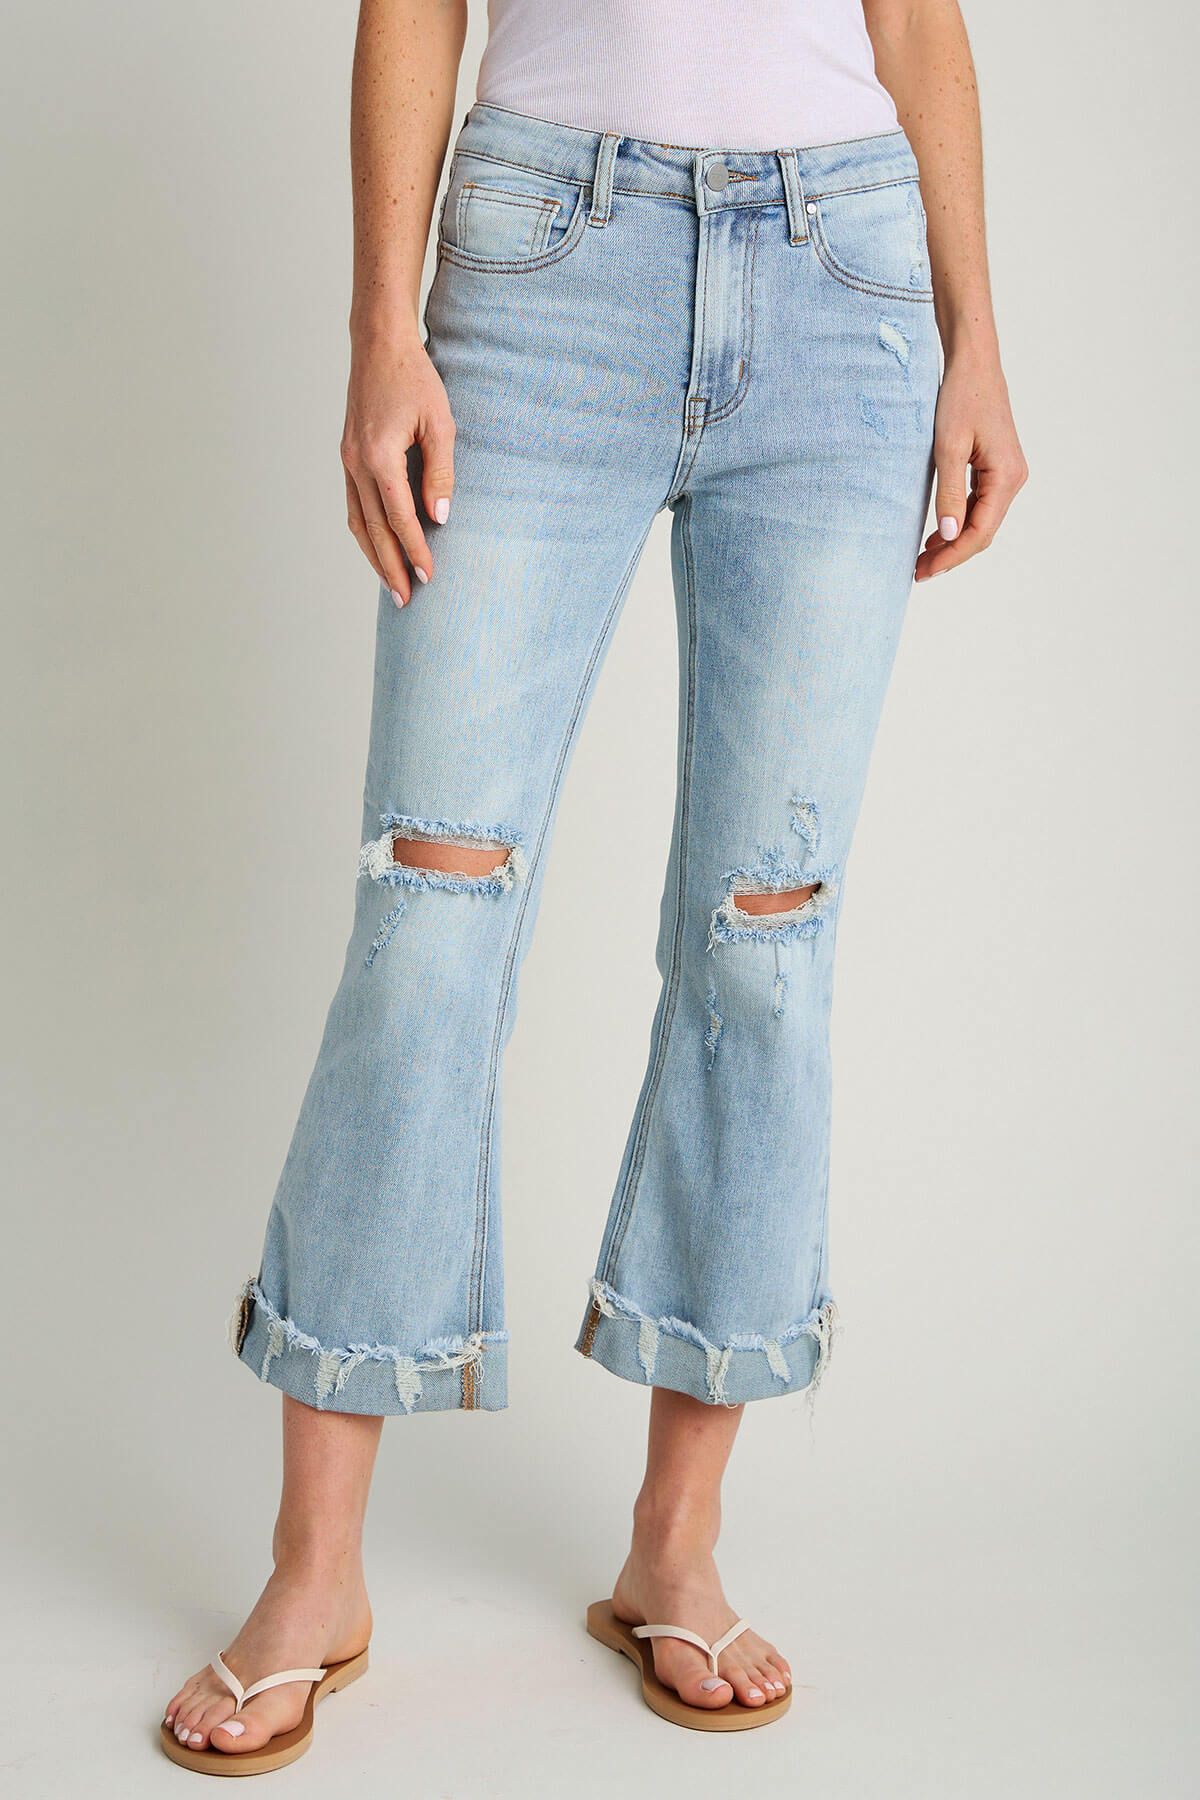 Risen Distressed Ankle Bootcut Cuffed Jeans | Social Threads